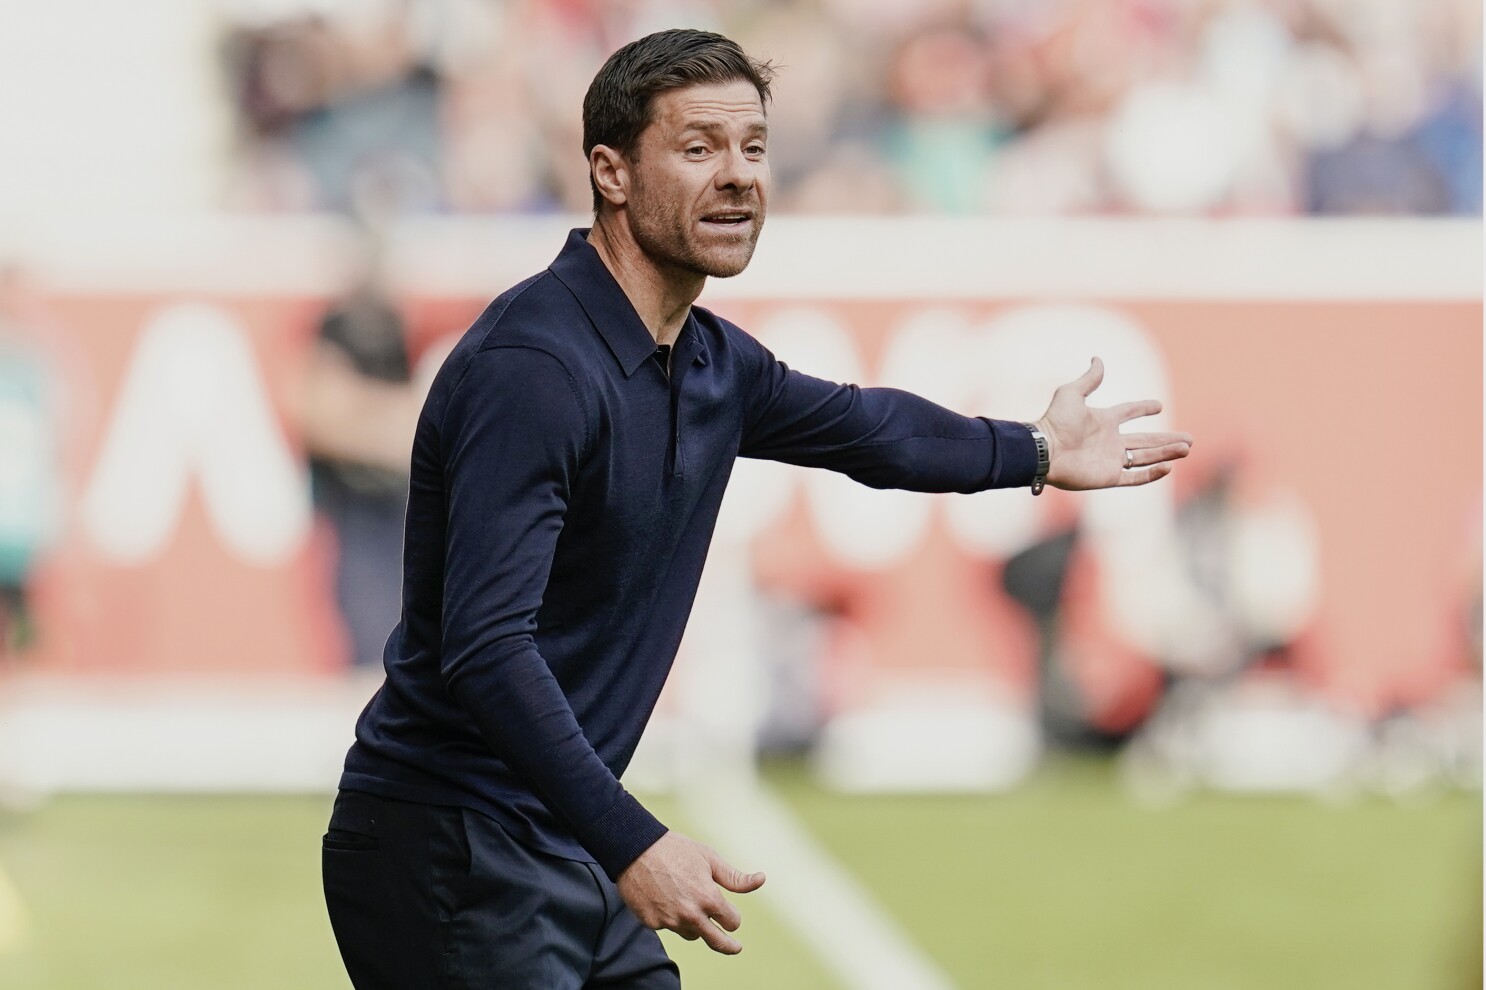 Xabi Alonso has been a wonderful manager for Leverkusen so far.